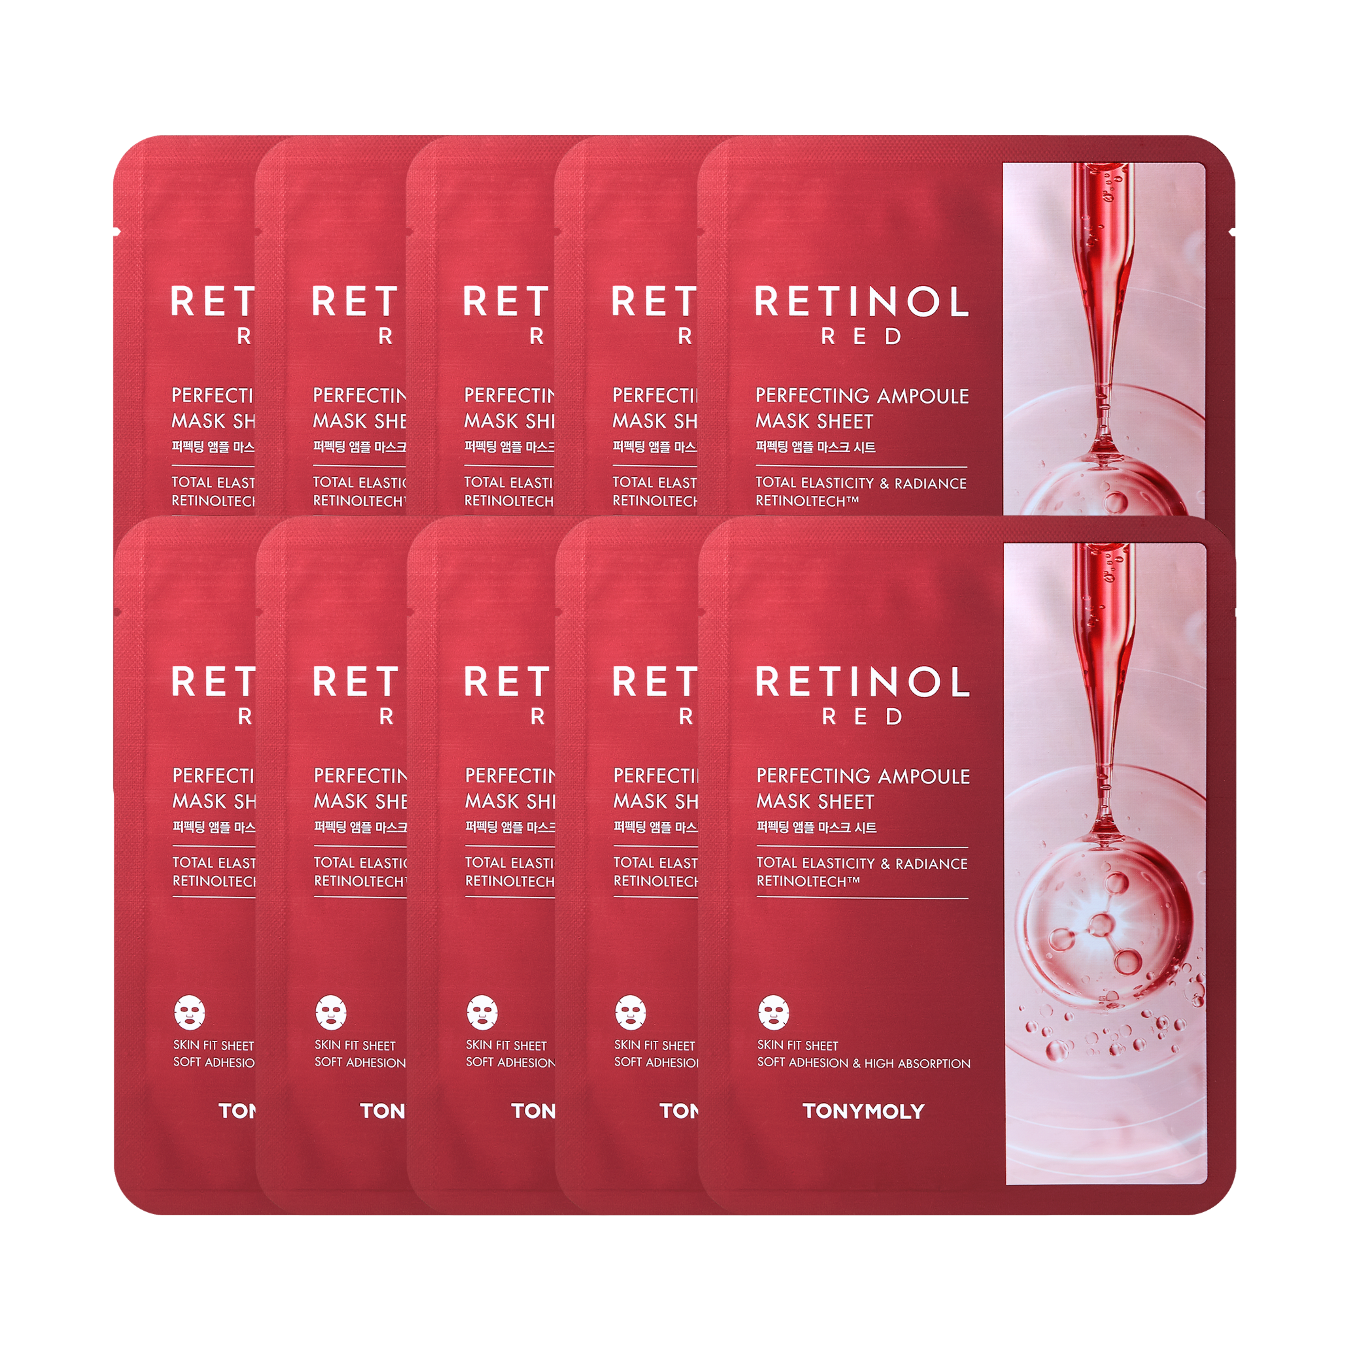 Red Retinol Perfecting Ampoule Mask